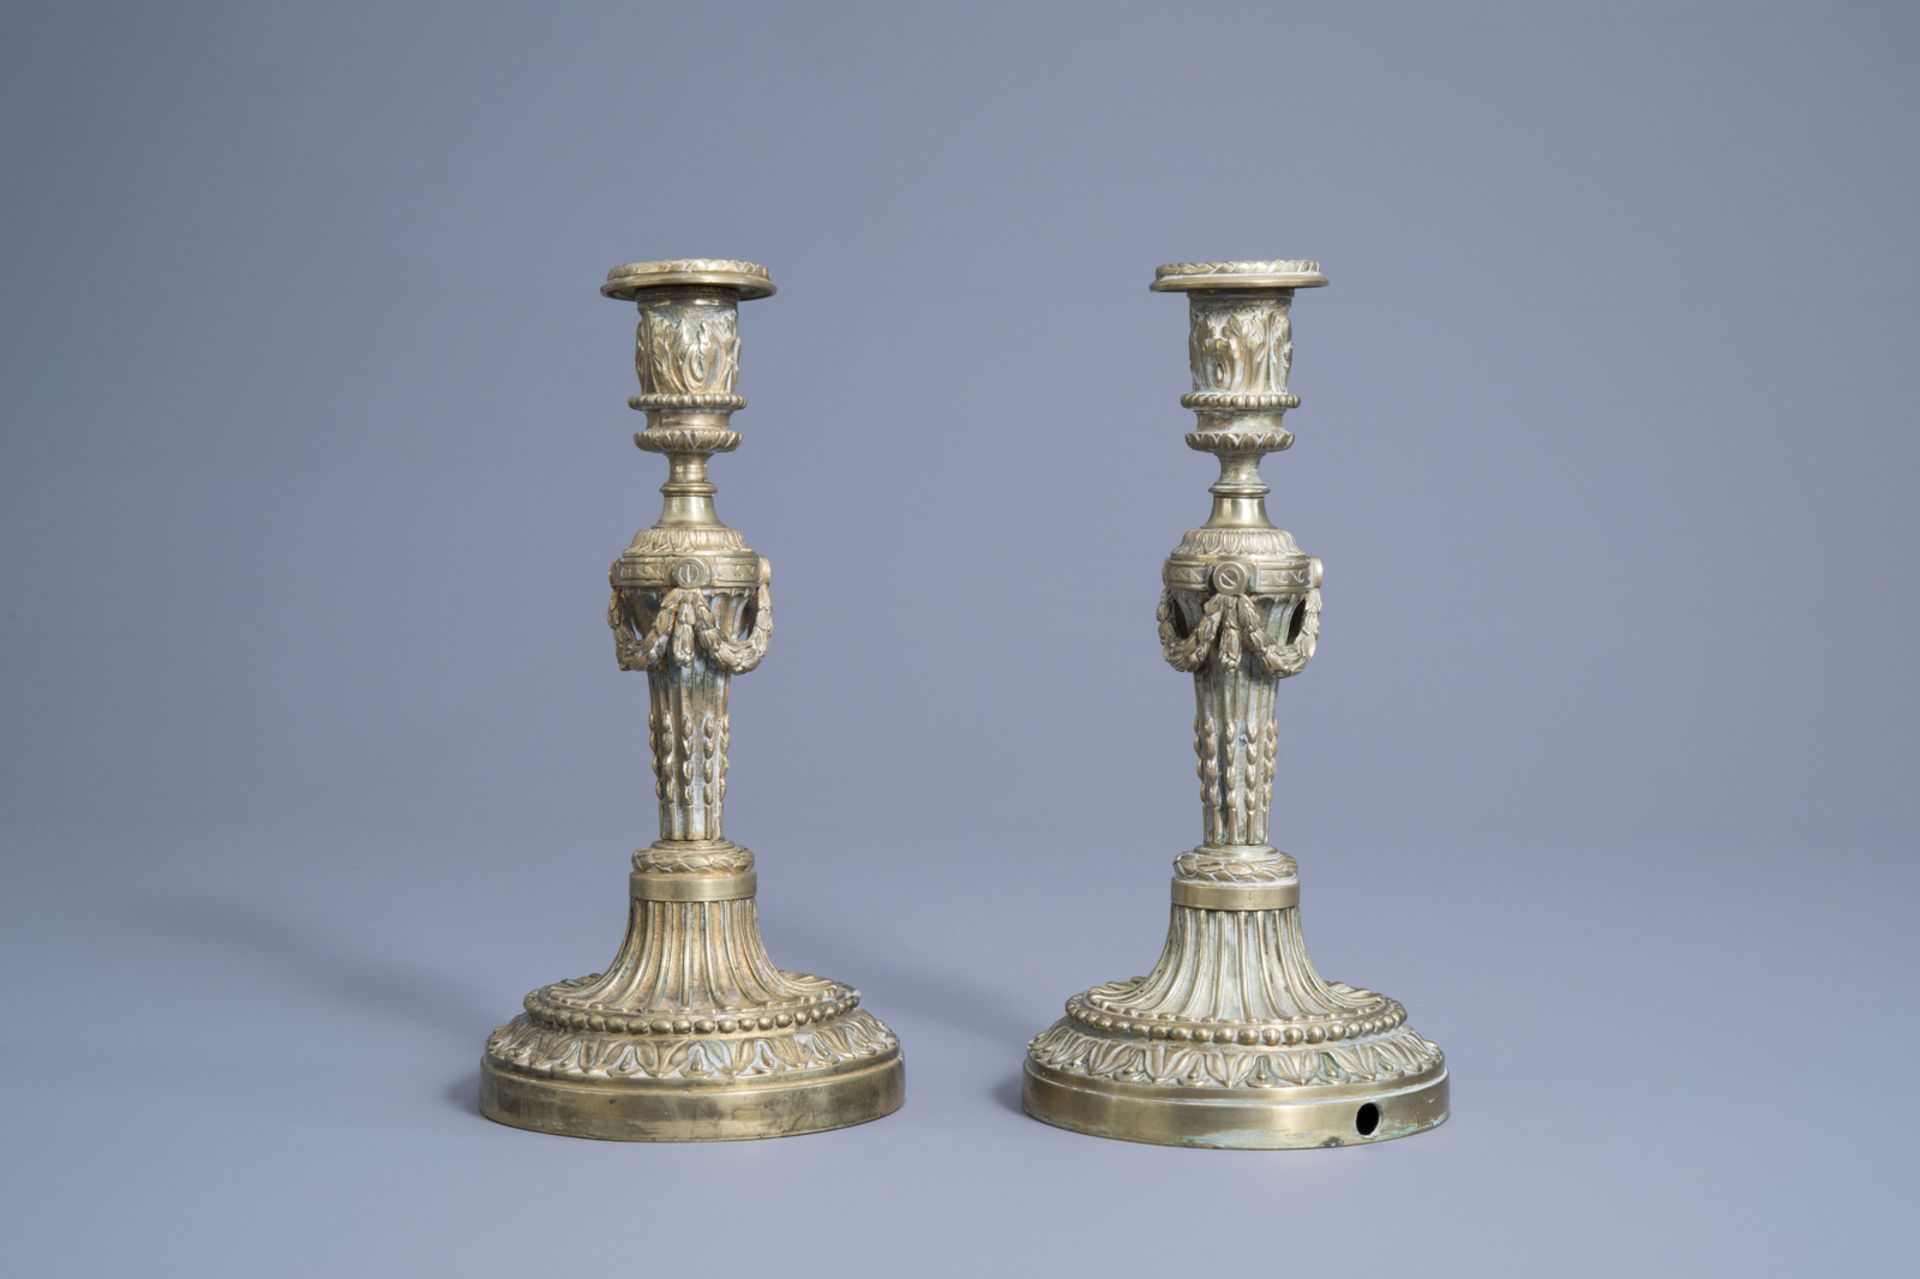 A pair of French Neoclassical bronze candlesticks with acanthus leaves and garlands, 18th C. - Image 3 of 7